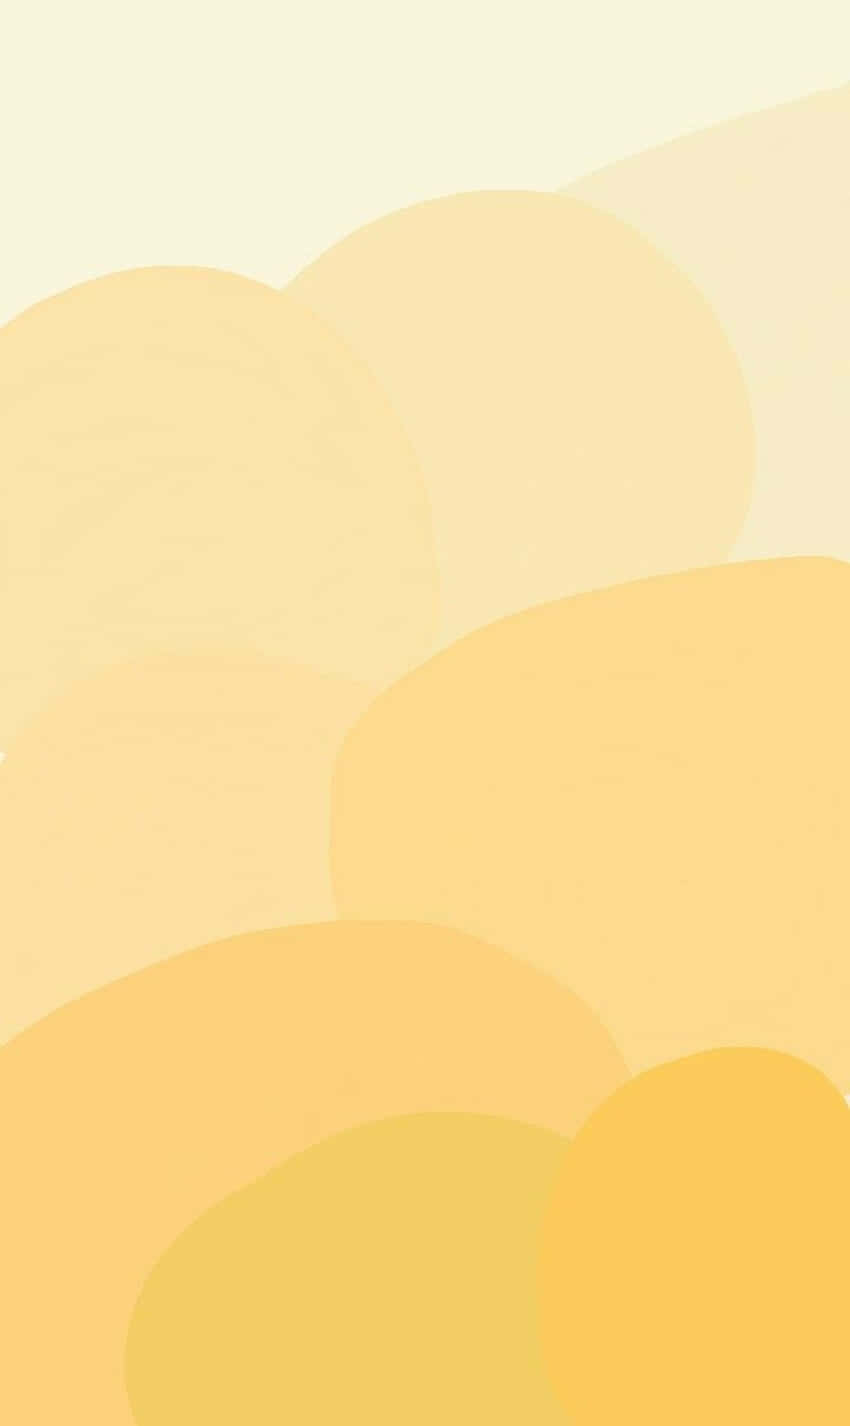 Bright And Warm Aesthetic Of A Golden Yellow Sun Background